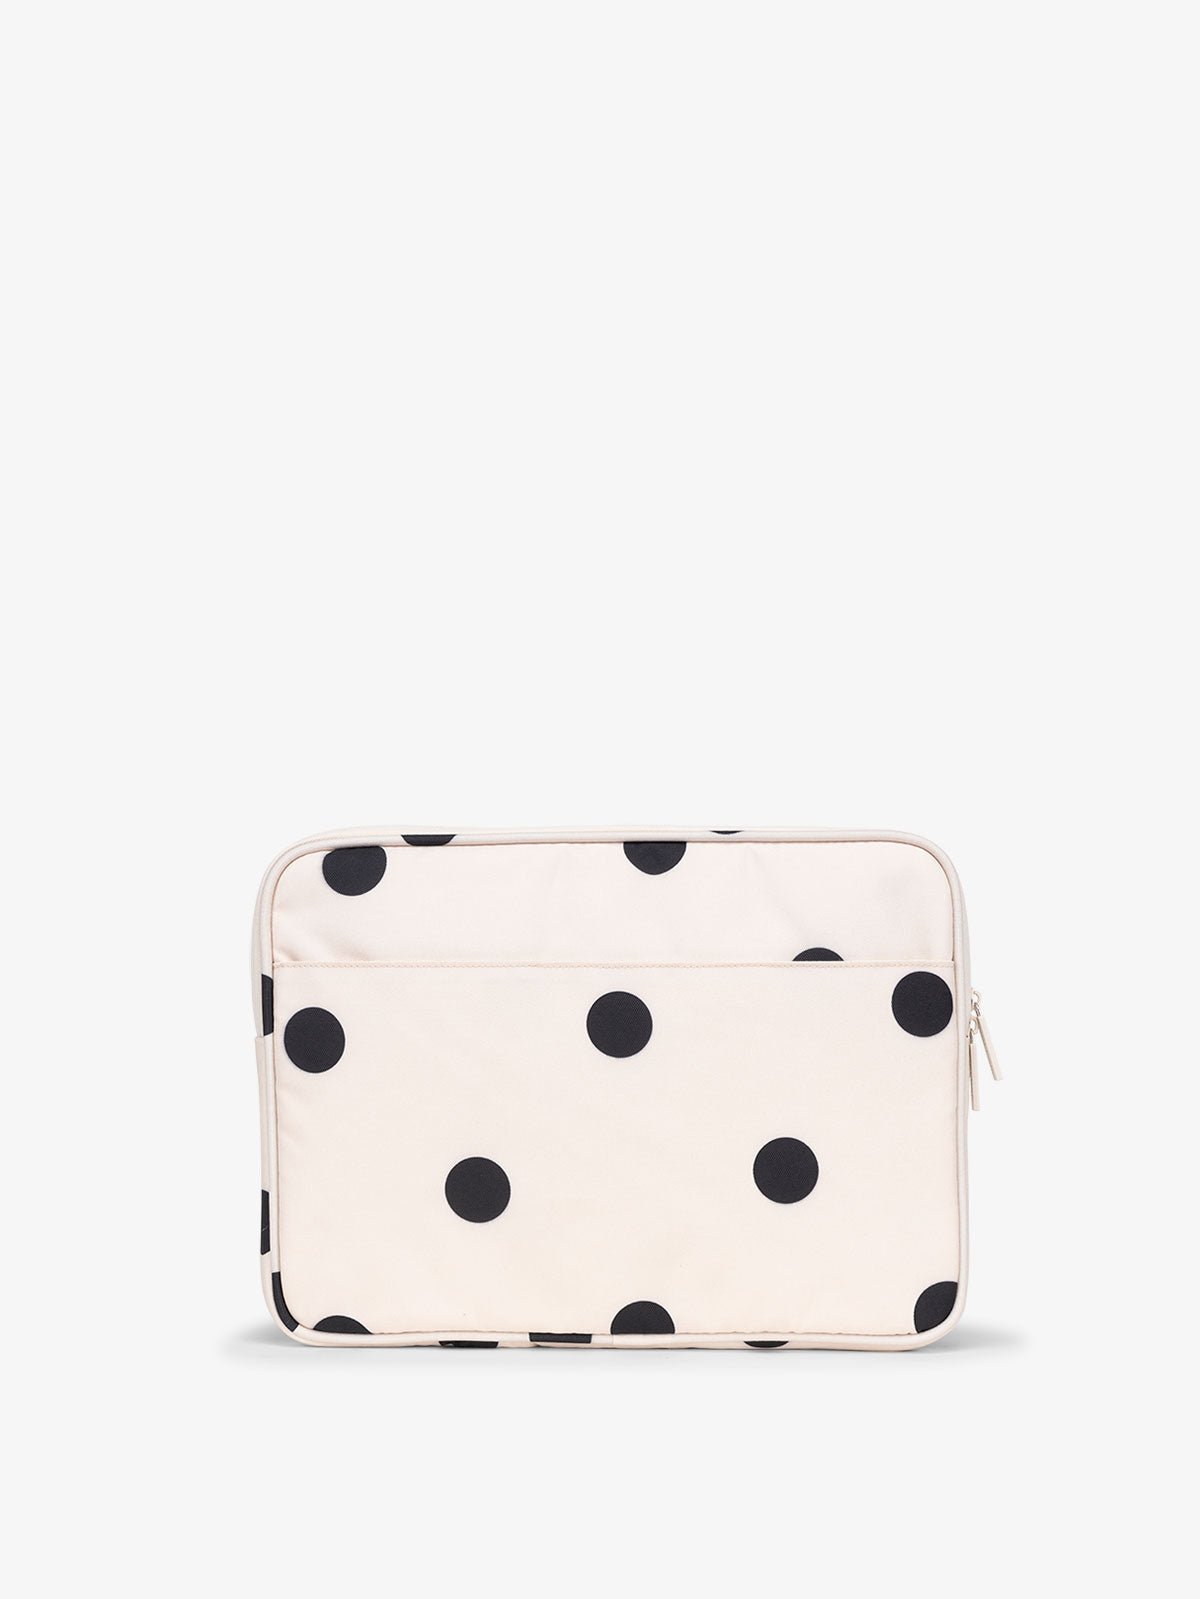 CALPAK 13-14 Inch Laptop Sleeve with front and back pockets in polka dot